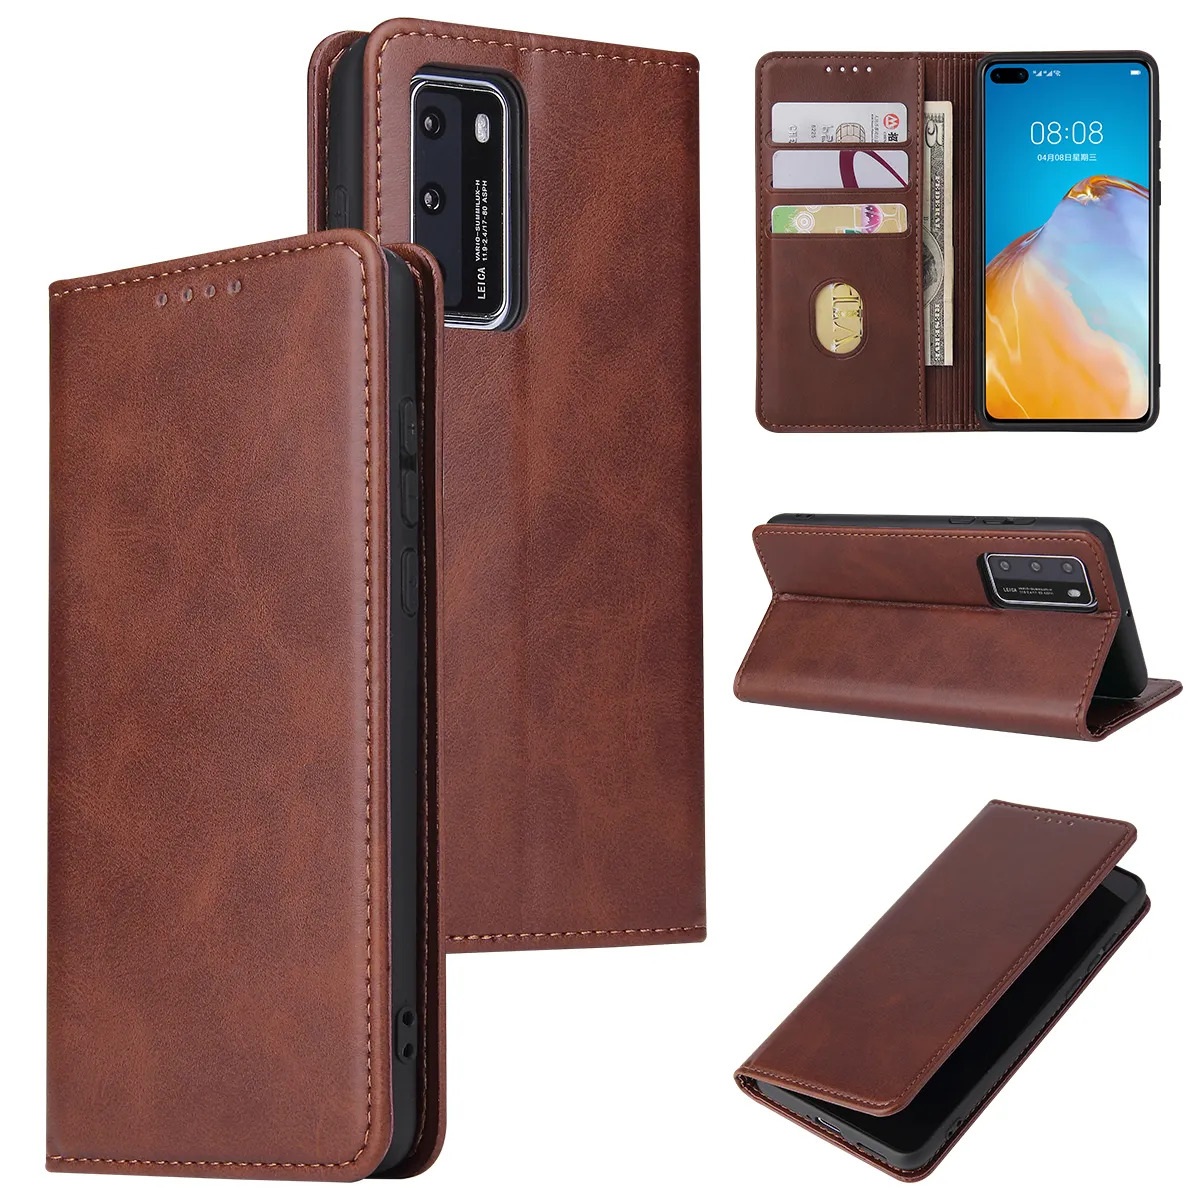 IVANHOE Magnetic Leather Case For Huawei Mate 20 30 P20 P30 P40 Pro Lite Y6 Y7 2019 2020 lite Wallet Card Flip Phone Cover